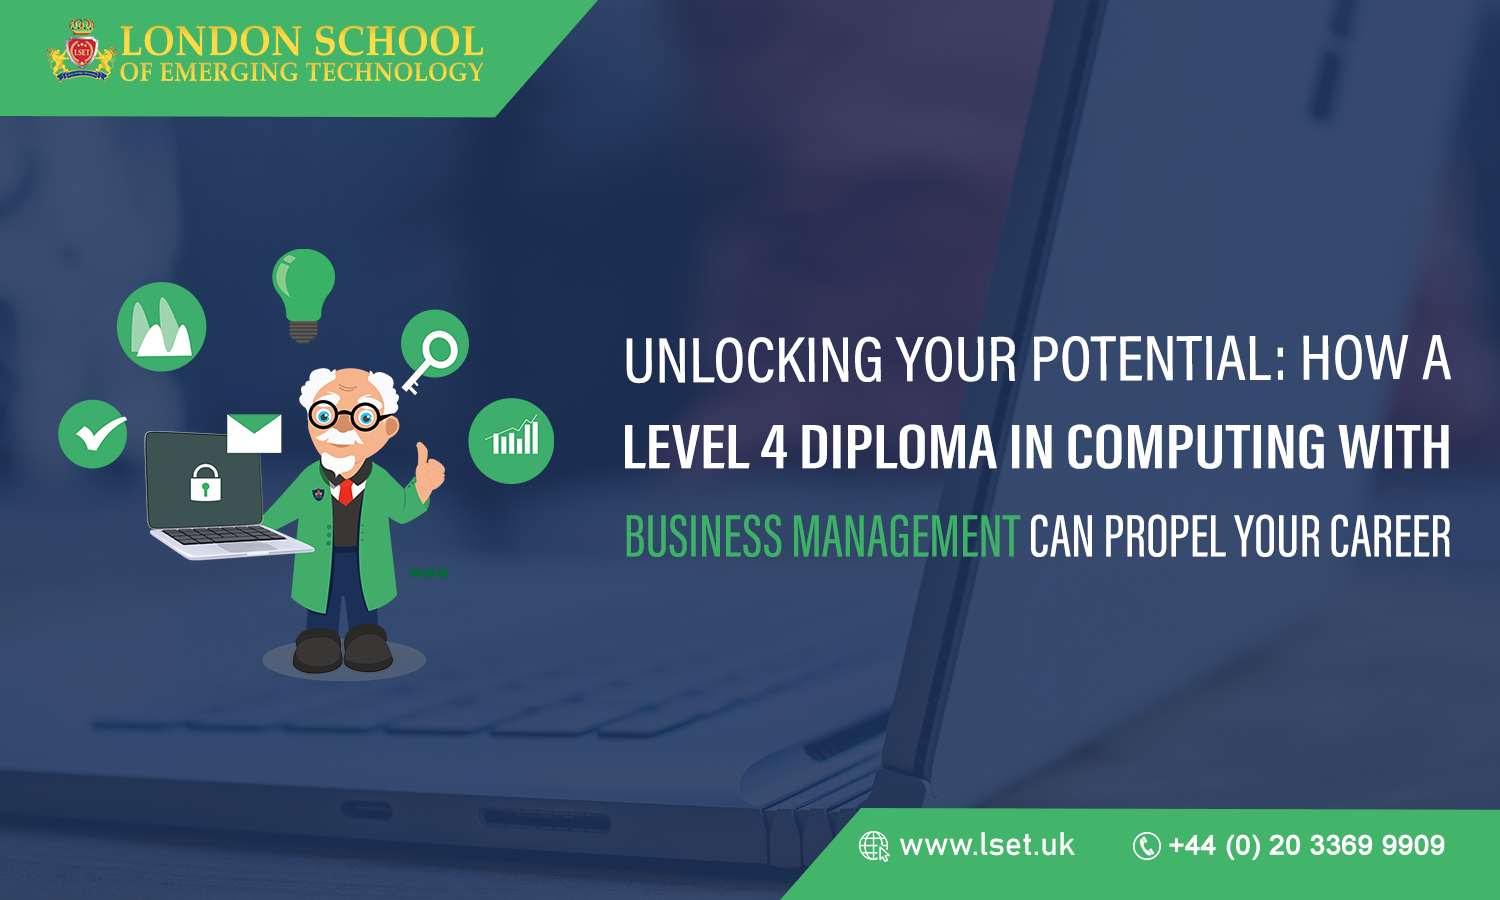 Unlocking Your Potential How a Level 4 Diploma in Computing with Business Management Can Propel Your Career 4.48.22 PM